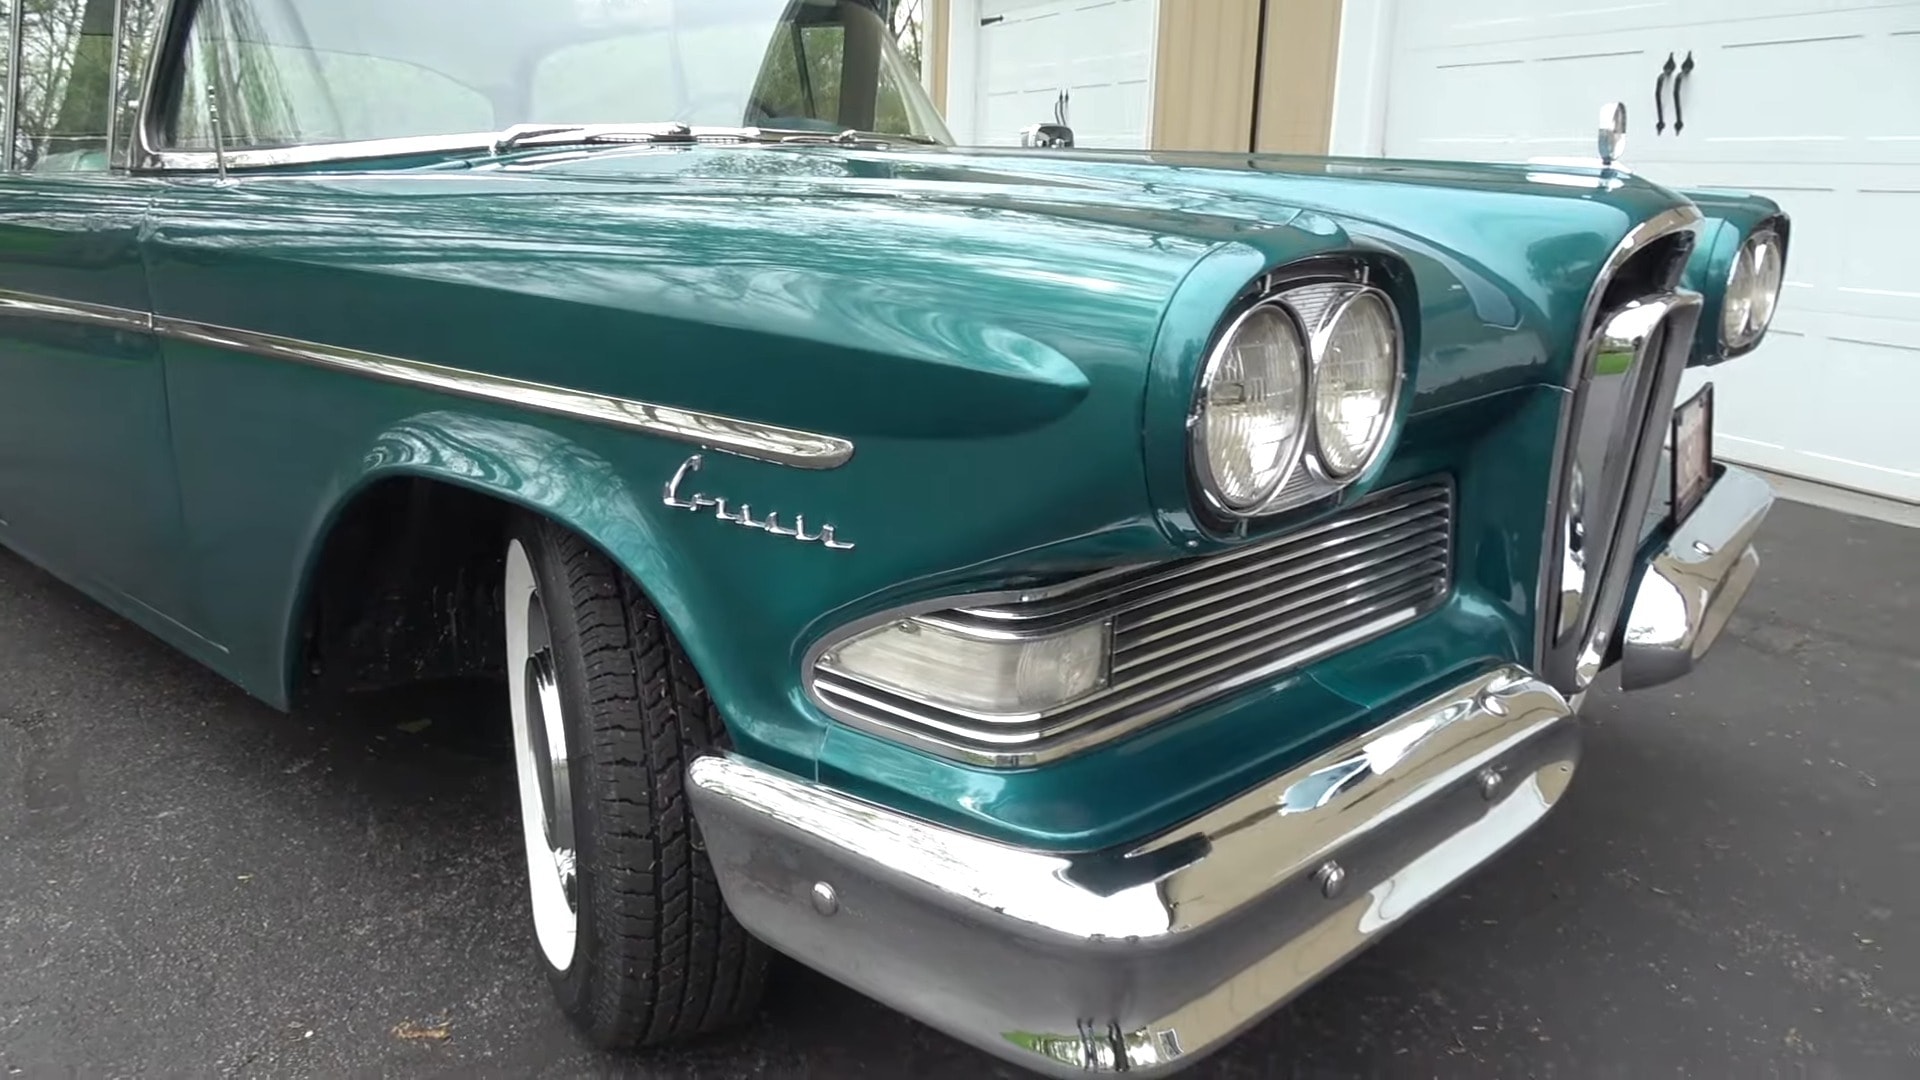 The Rise and Fall of Edsel